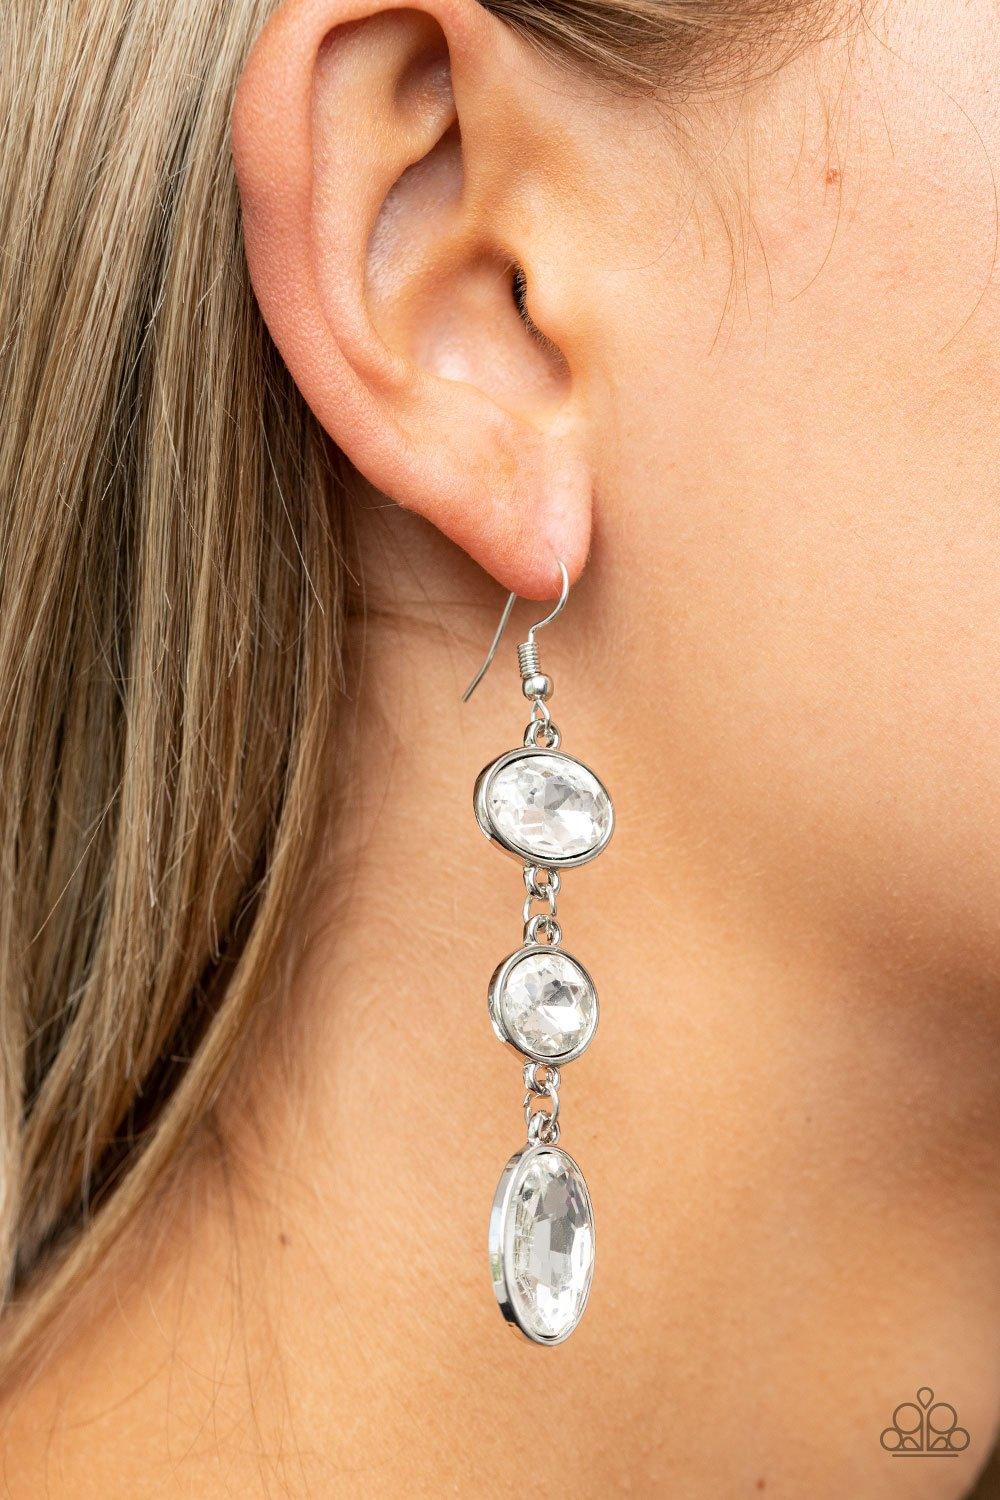 Paparazzi Accessories-The GLOW Must Go On! - White Earrings